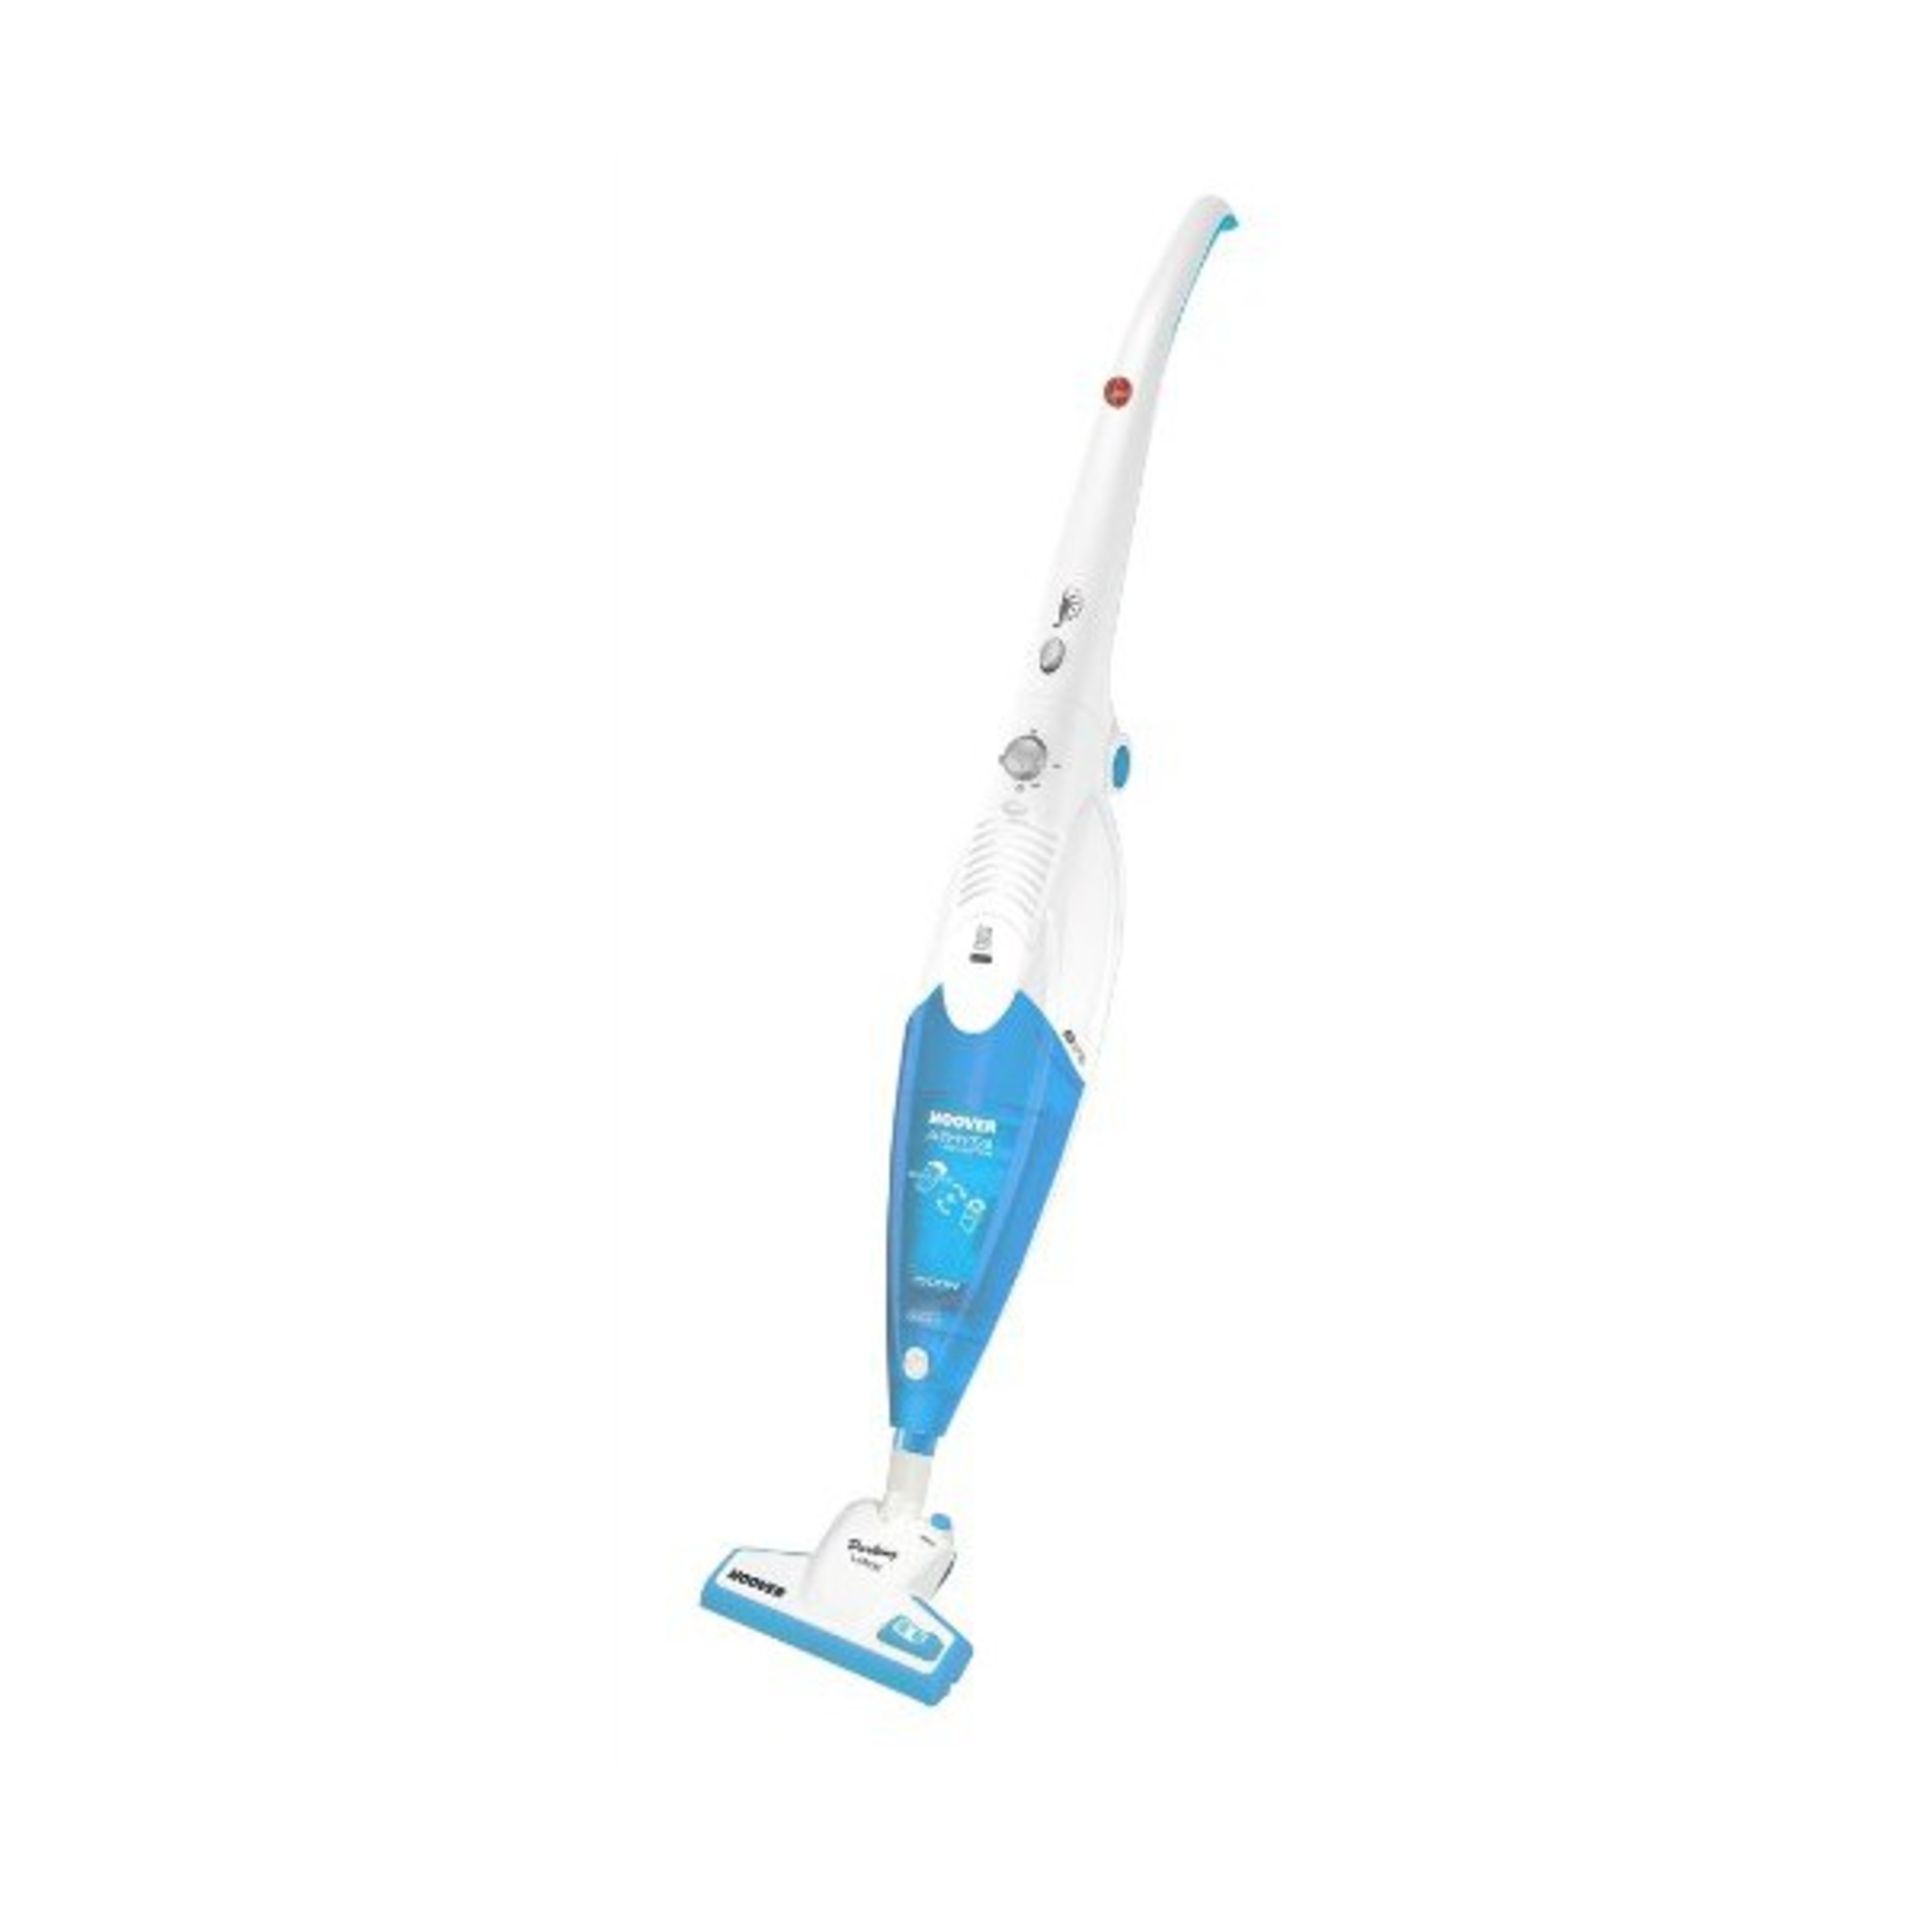 V Grade A Hoover Athyss Reverter STR 755 1500W - Stick Vacuum - Turquoise/White (Continental Plug)